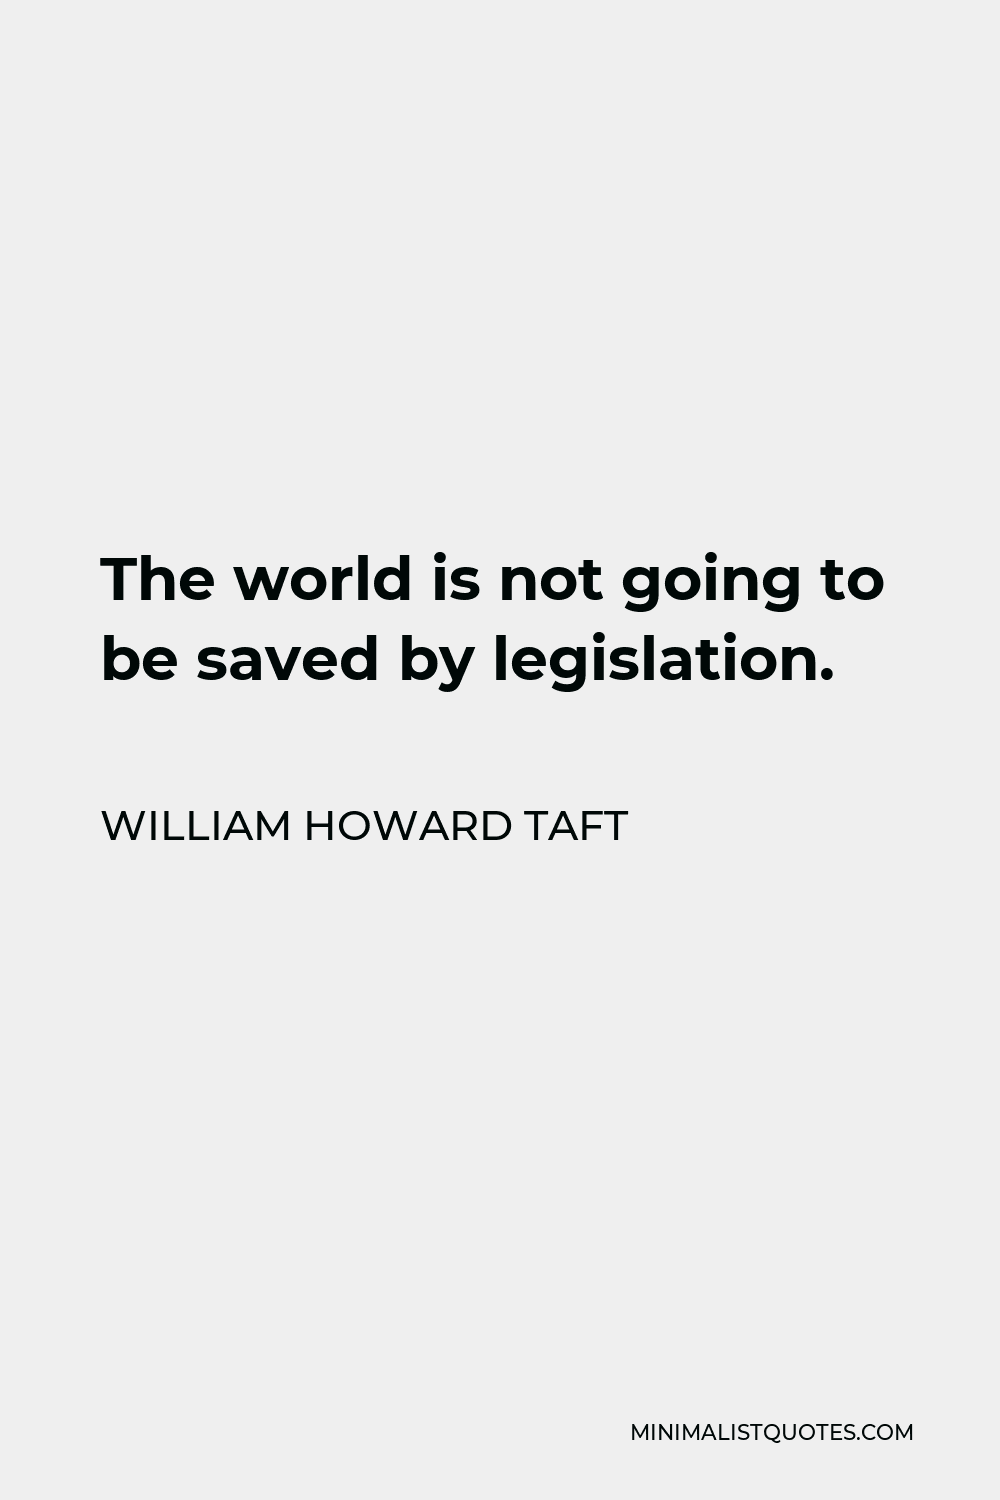 William Howard Taft Quote - The world is not going to be saved by legislation.